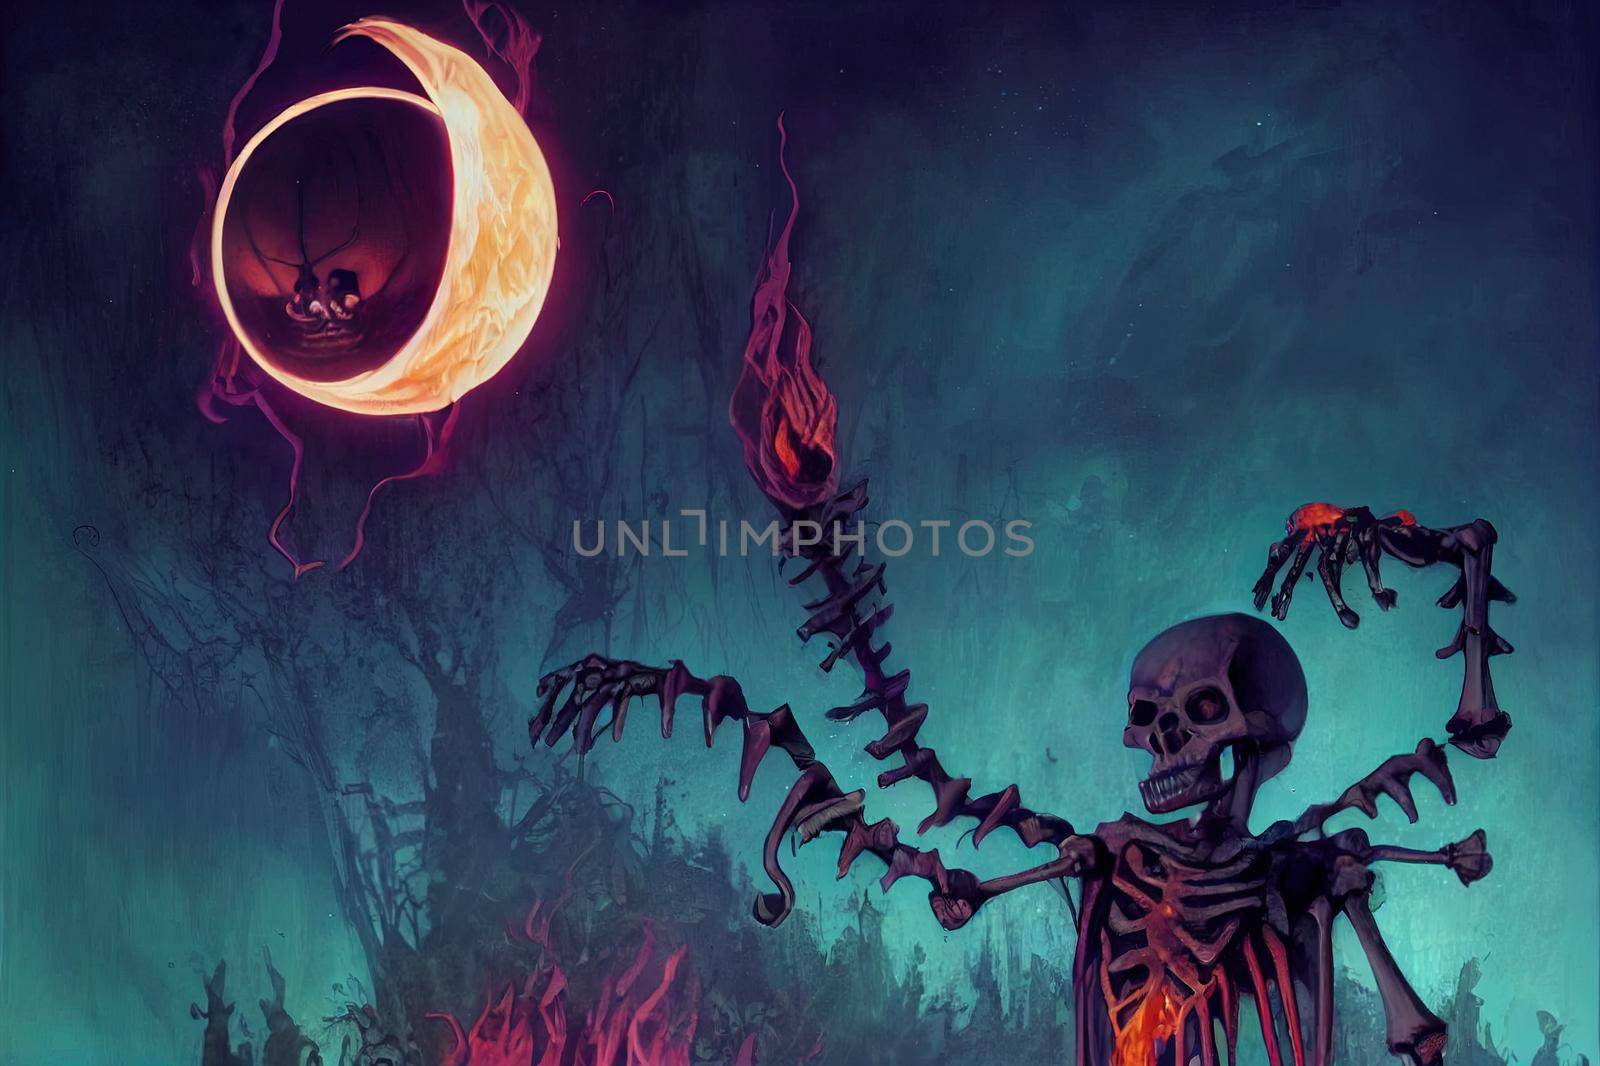 The sinister skeleton lich forms a sphere of fire in his hands, his eyes glowing with magic, he is wearing a ragged cloak and armor, and behind him, the magic towers fire a volley into the night sky.